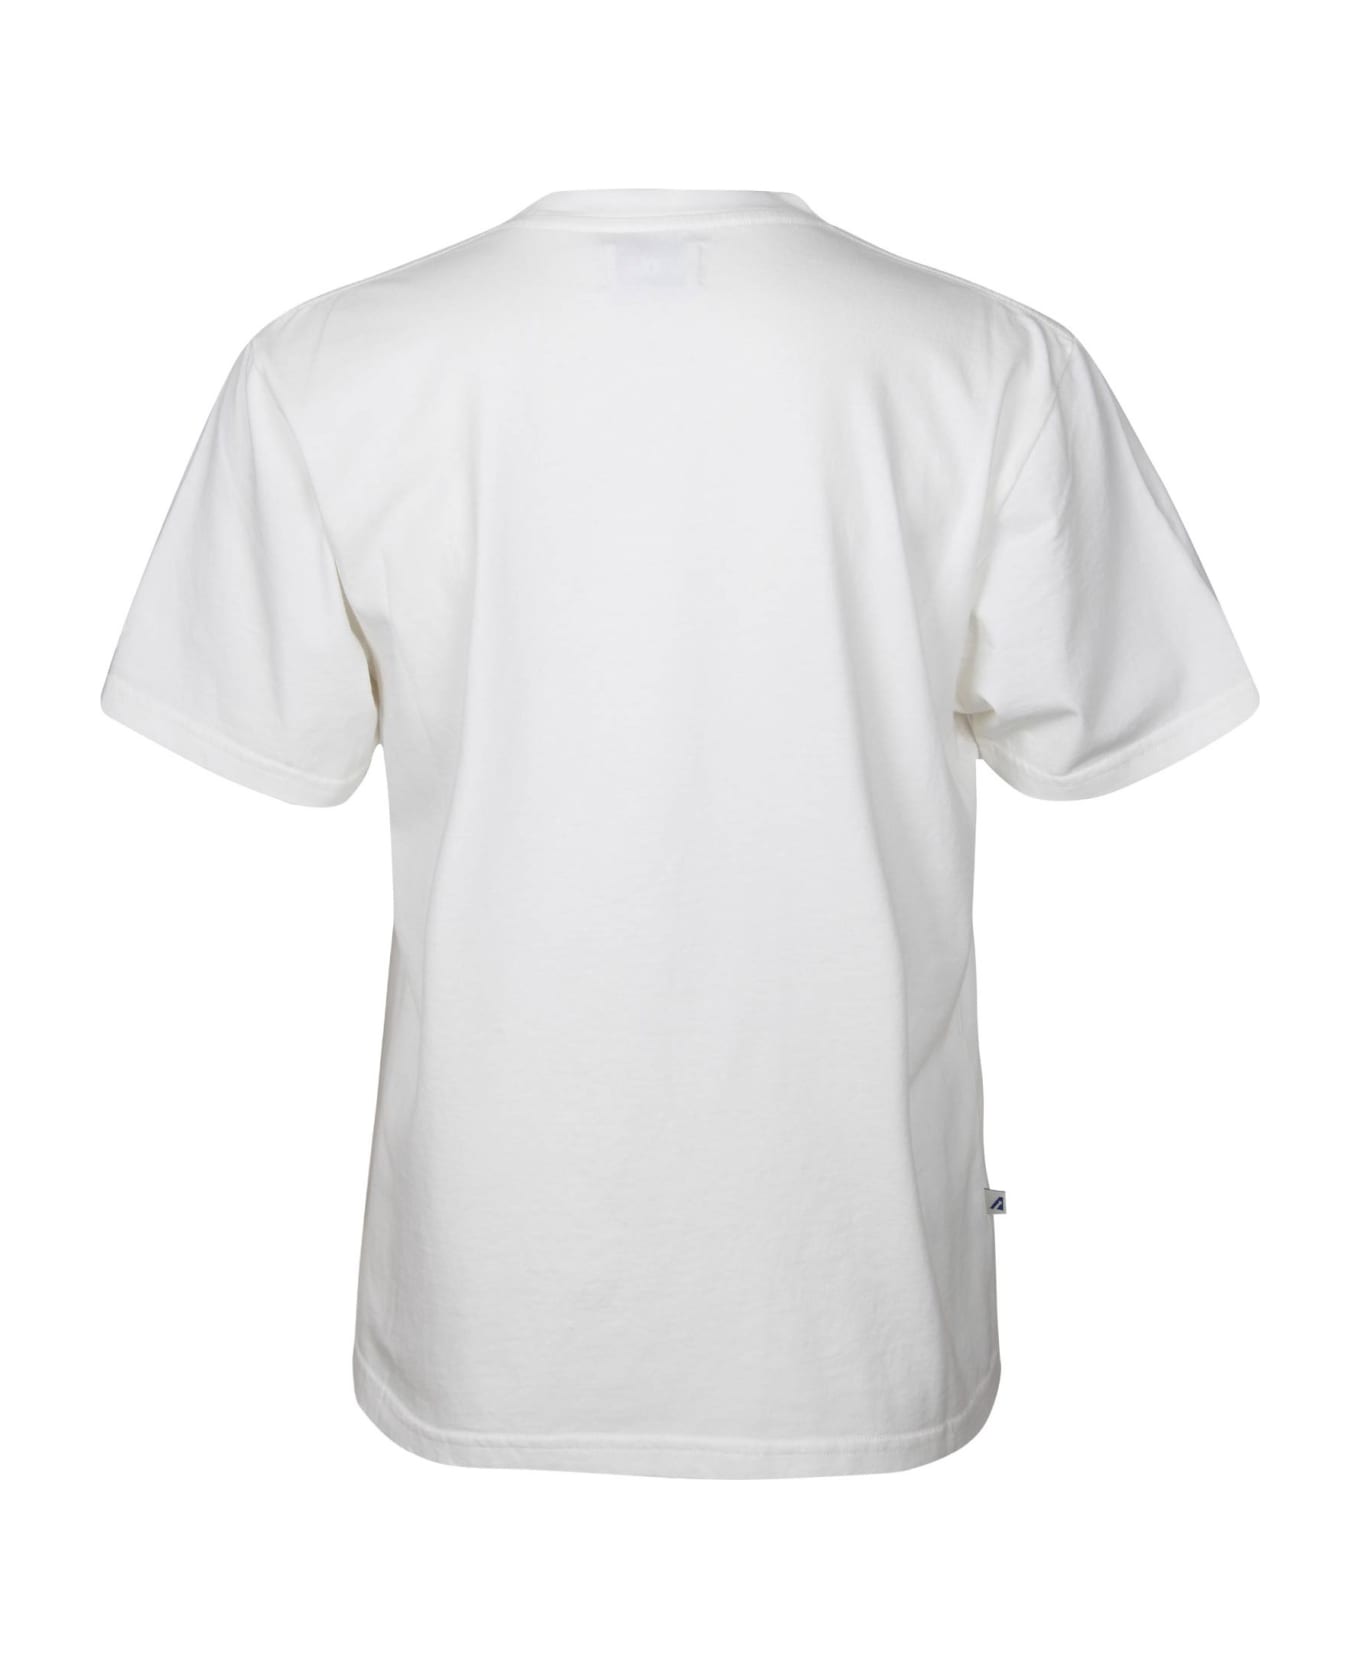 Autry Main Wom T-shirt In White Cotton - White